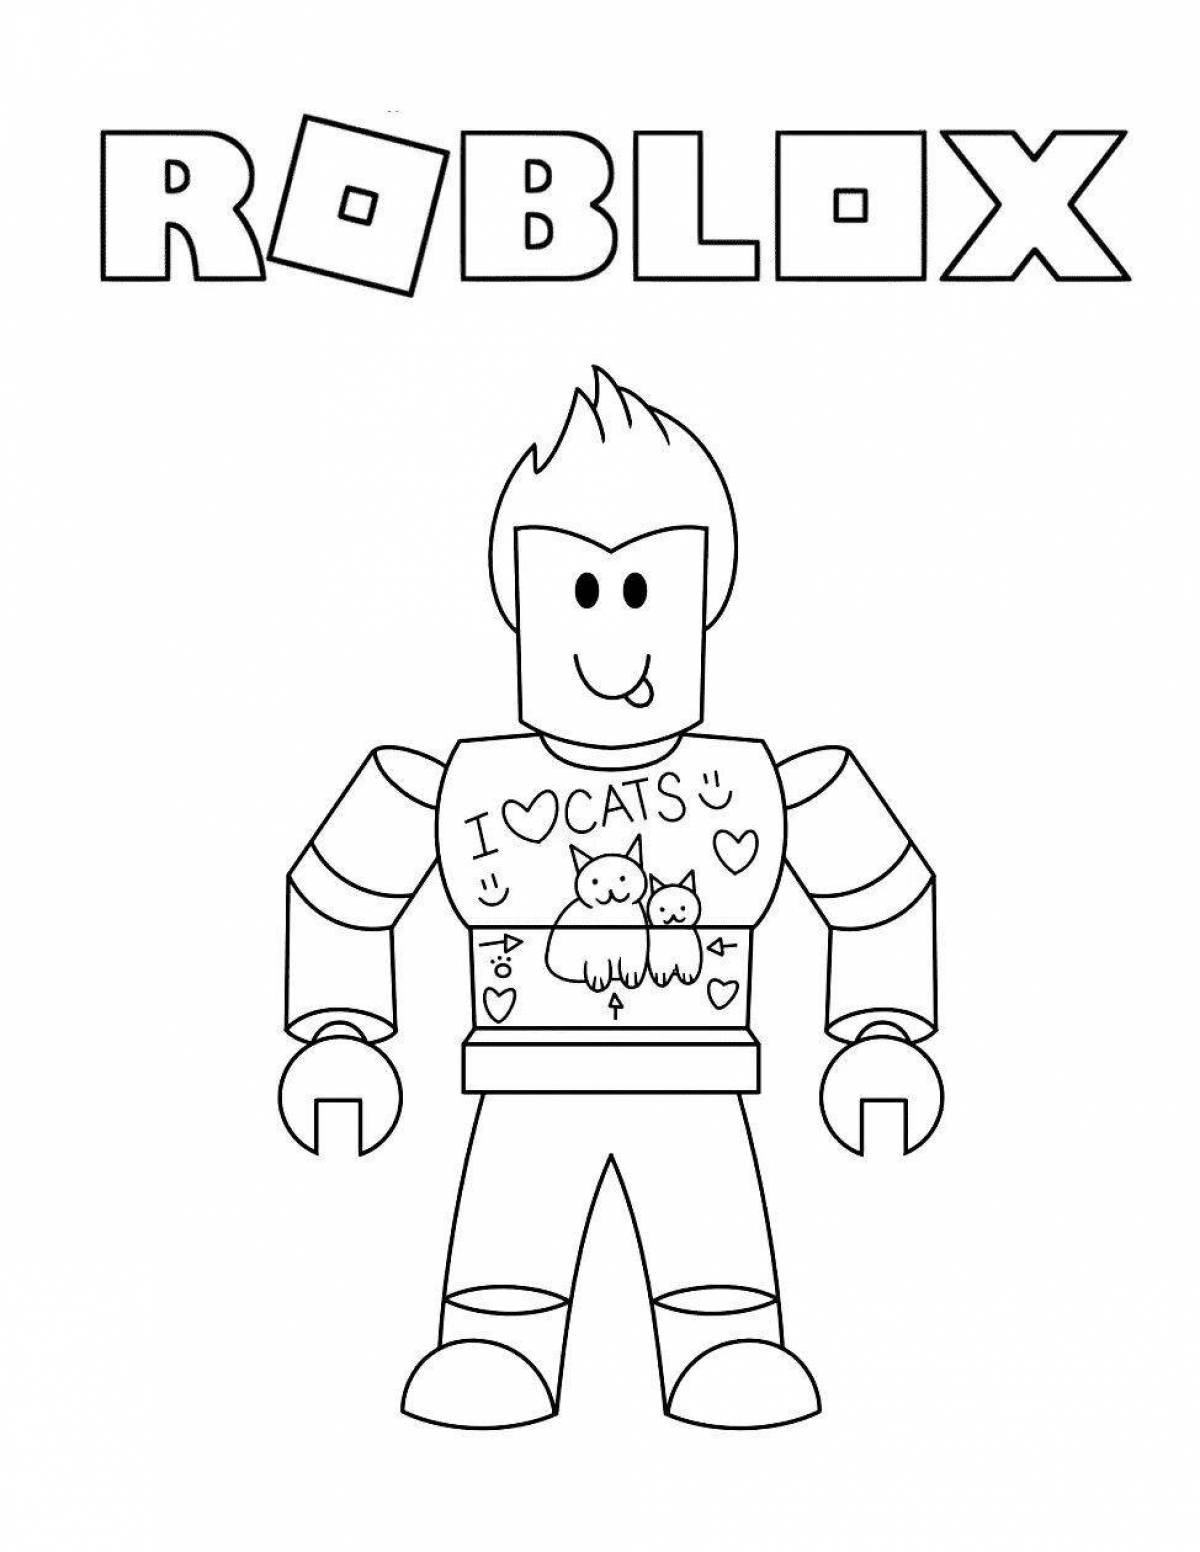 Intriguing 100 doors roblox coloring page